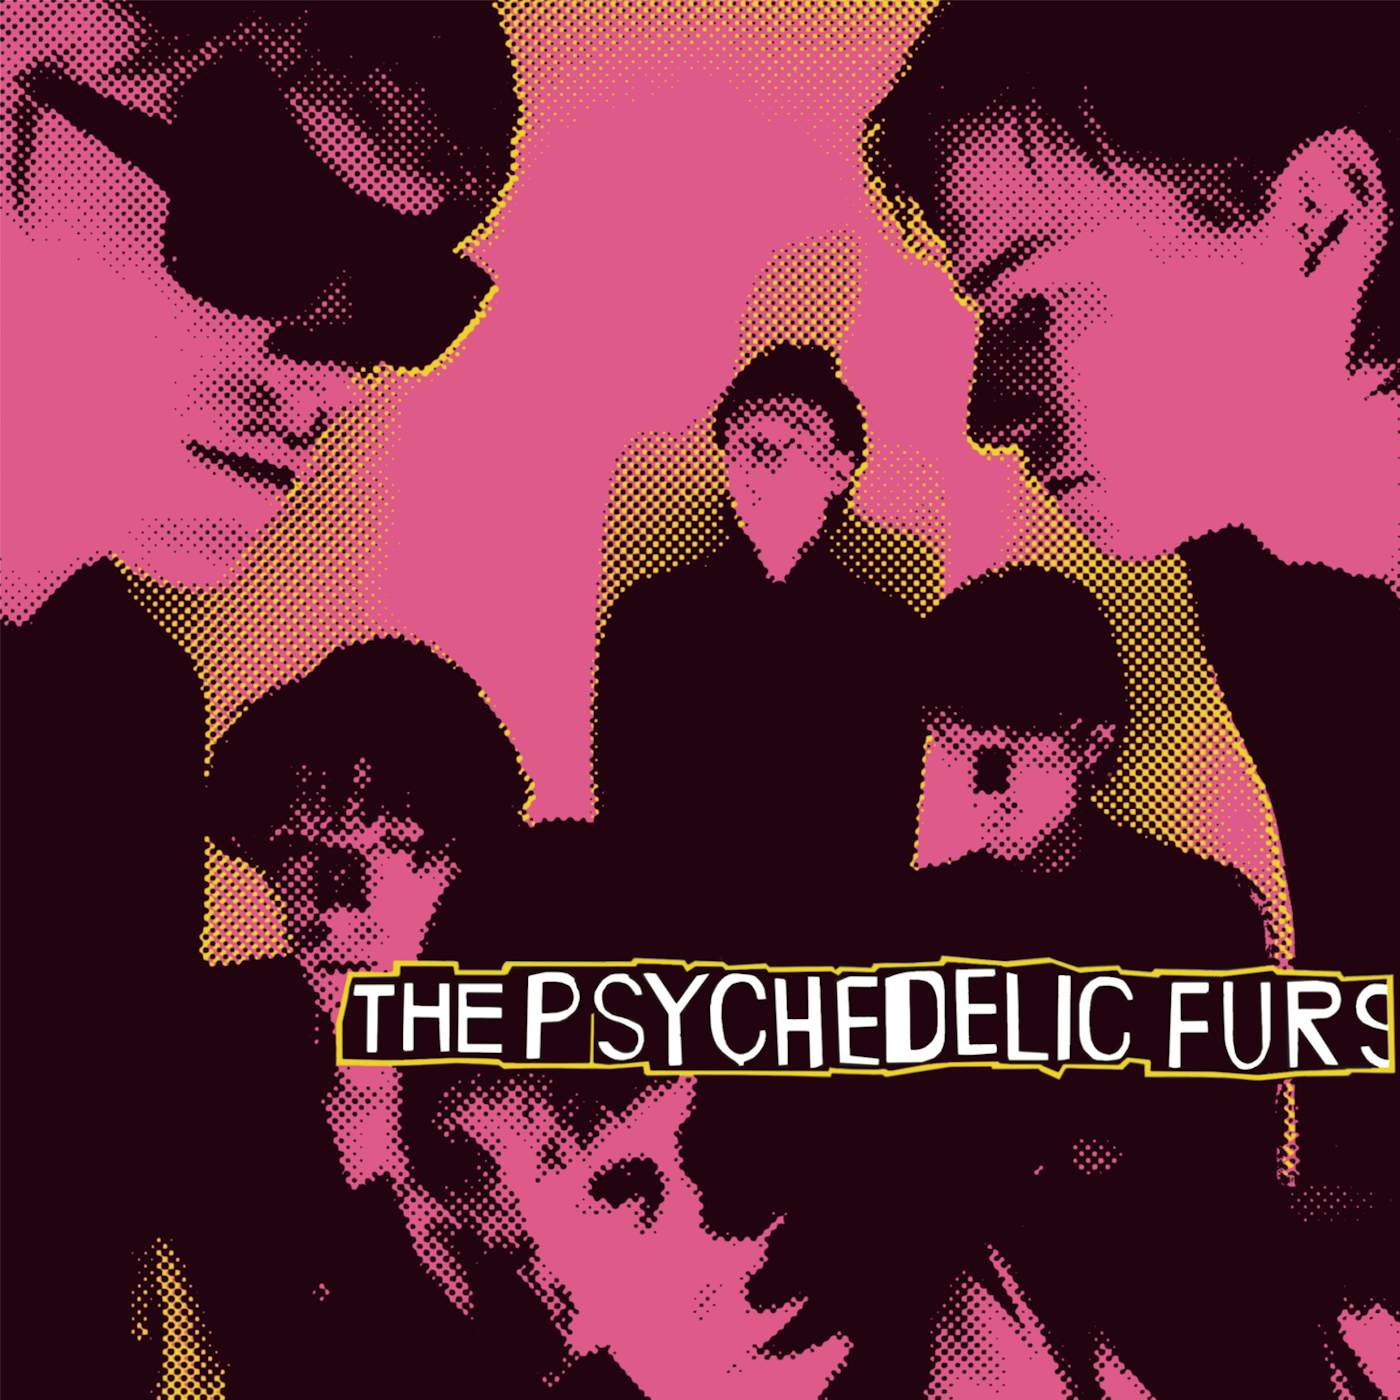 The Psychedelic Furs Vinyl Record